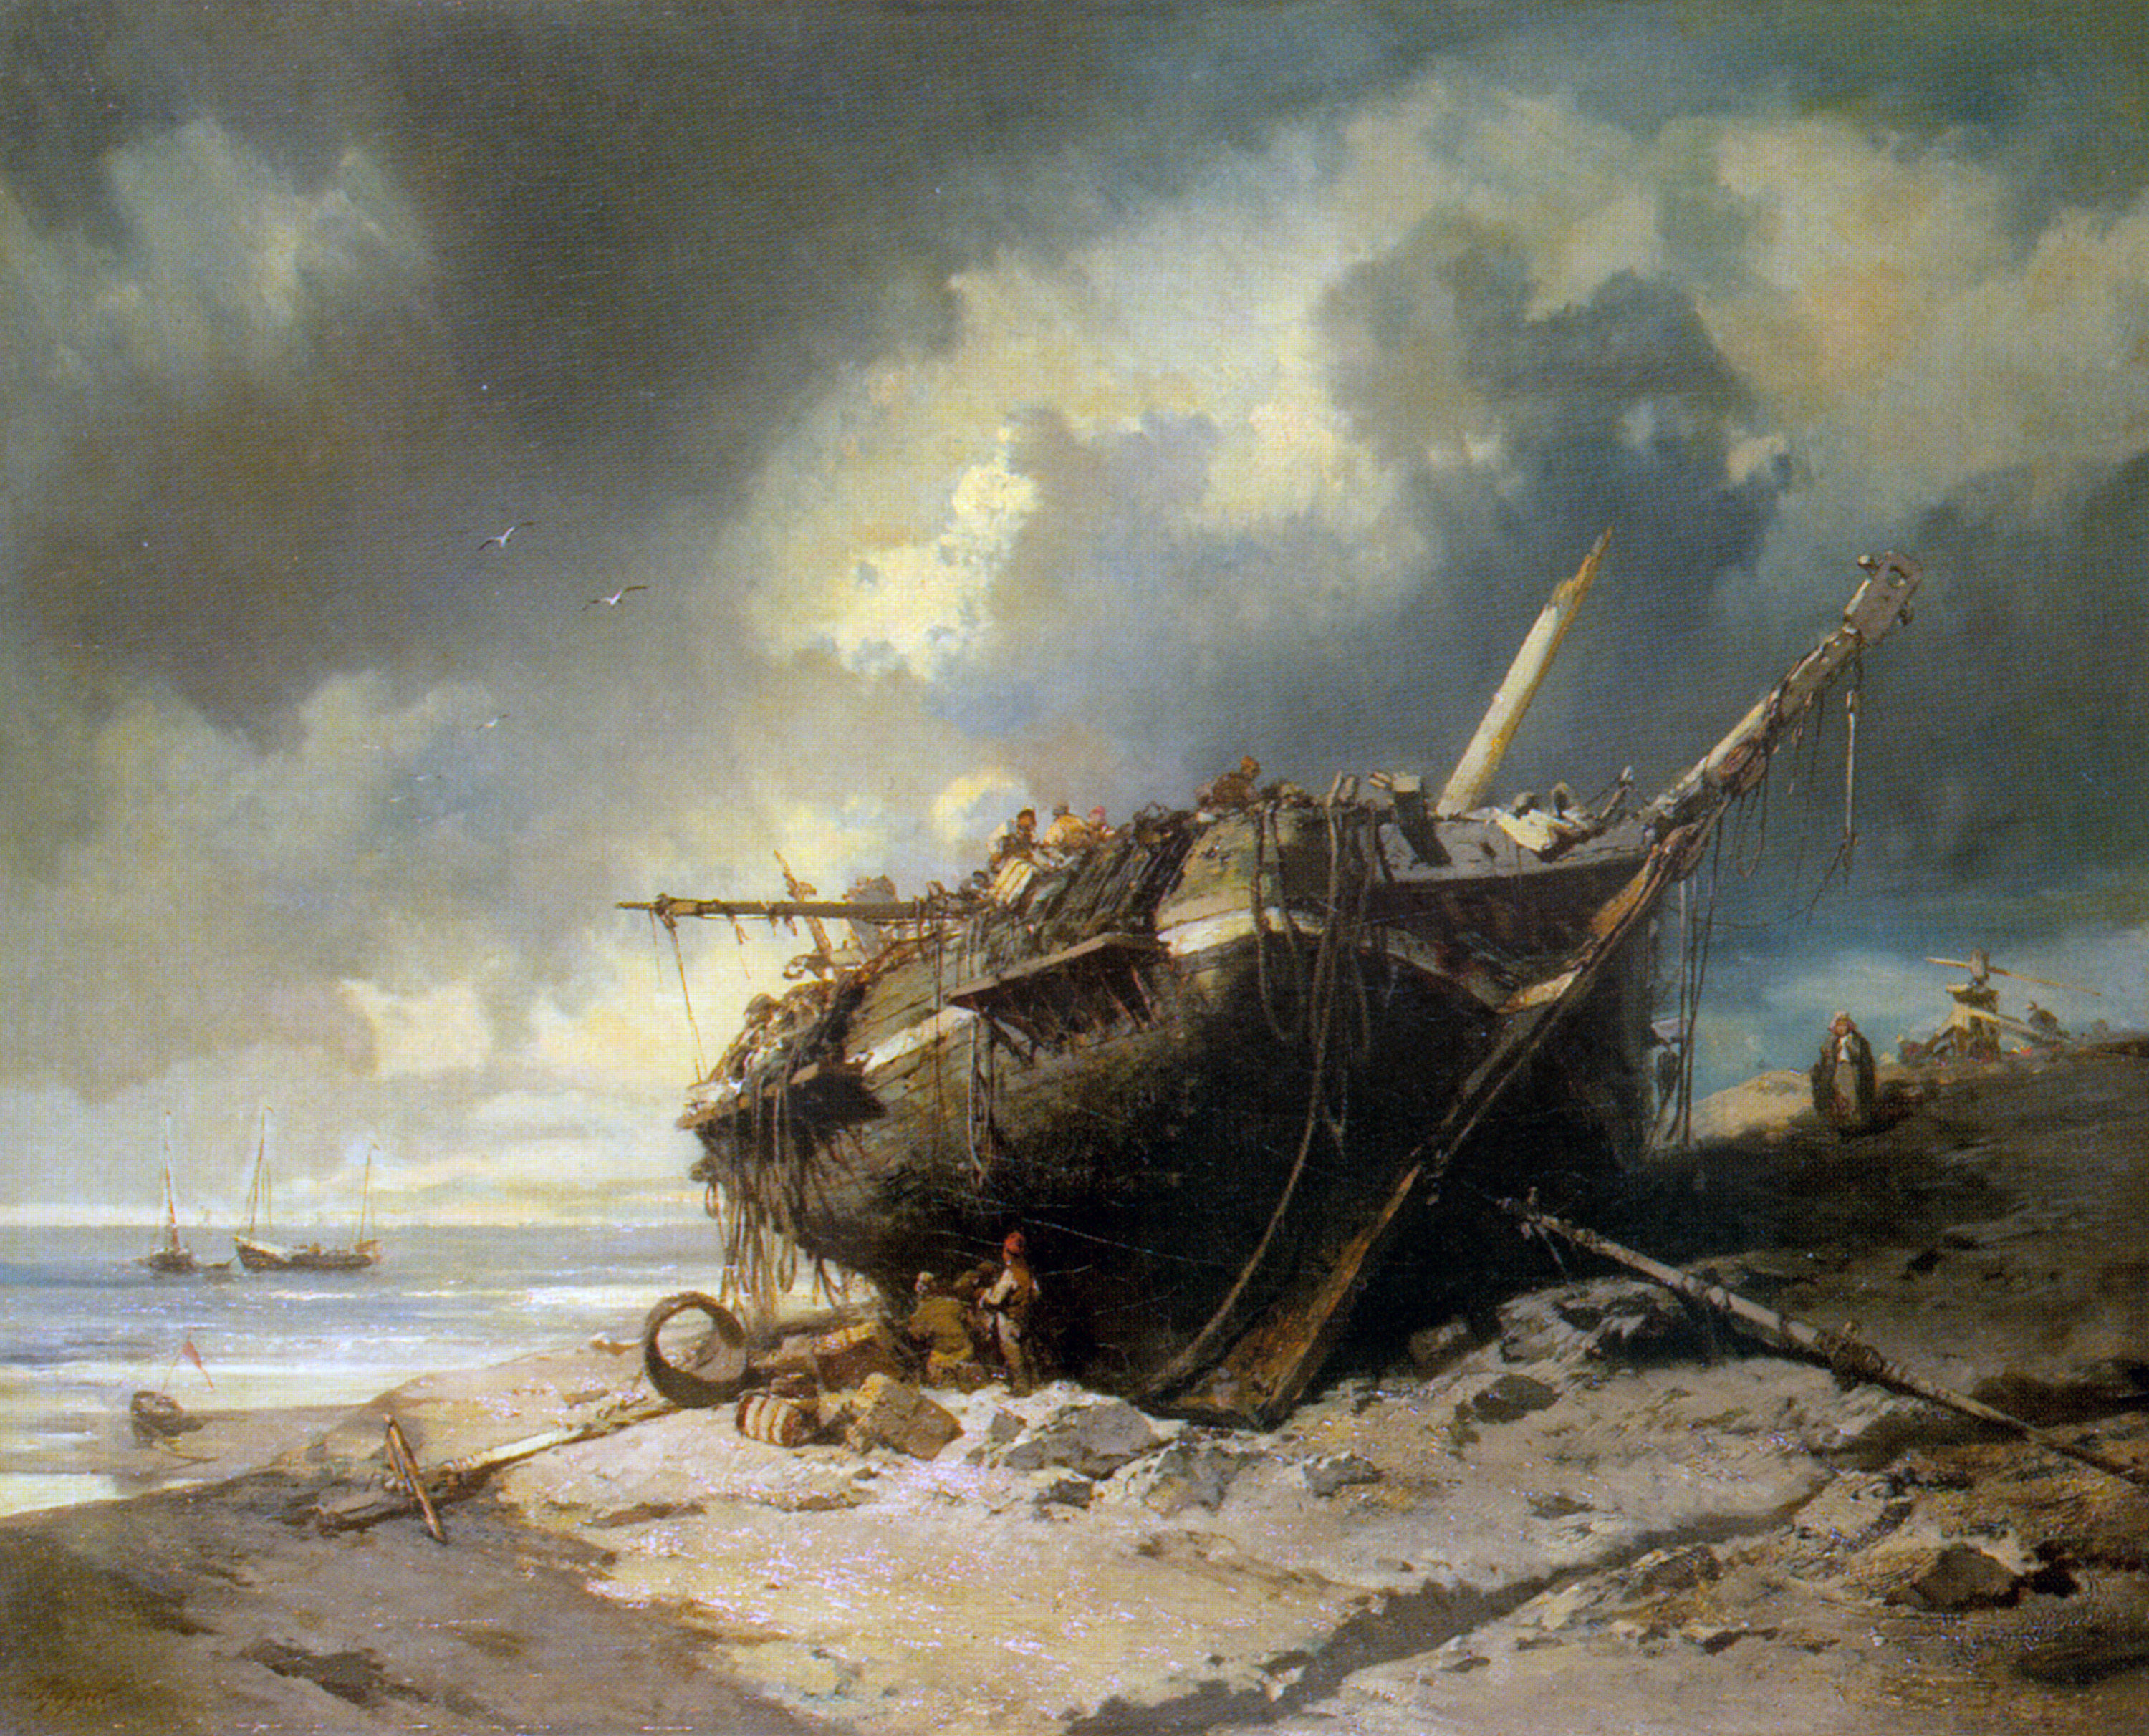 Dismantling a Beached Shipwreck by Charles Hoguet